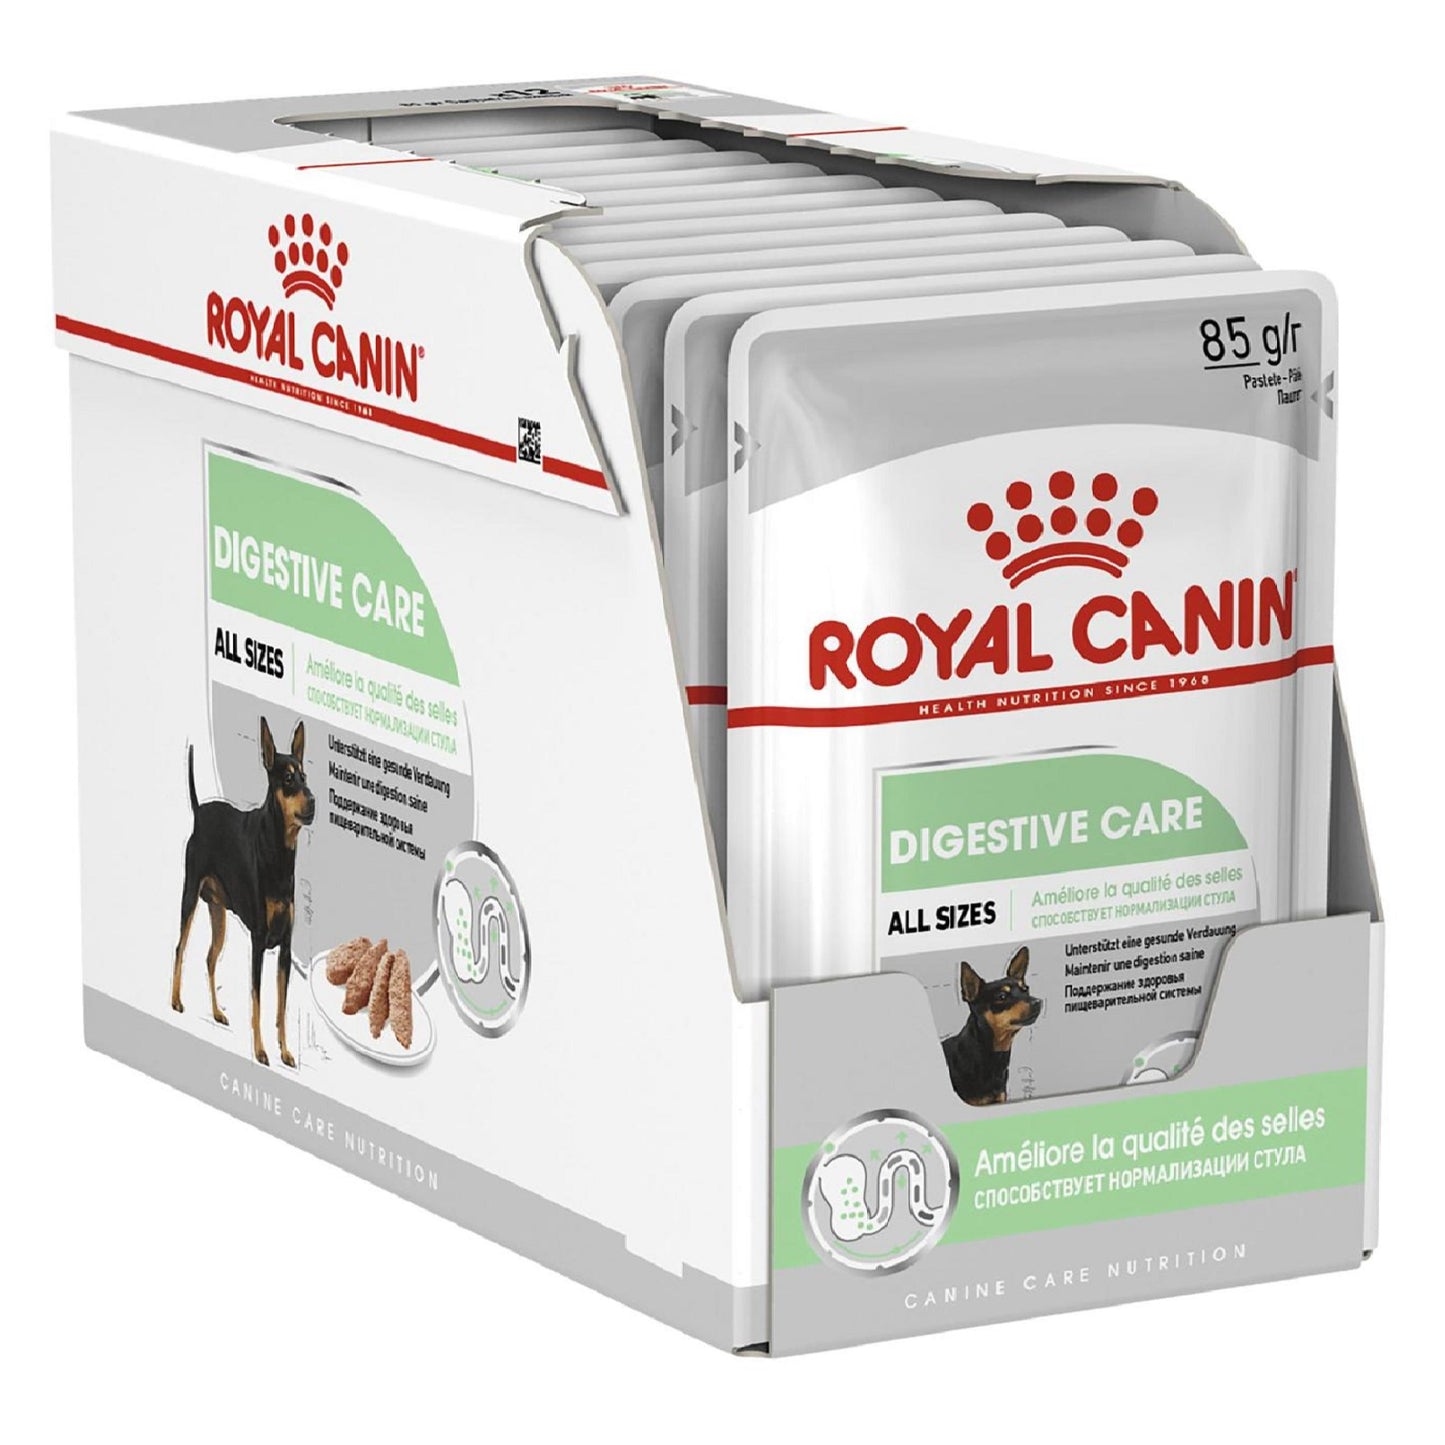 ROYAL CANIN - Digestive Care Pouches (12 x 85g)